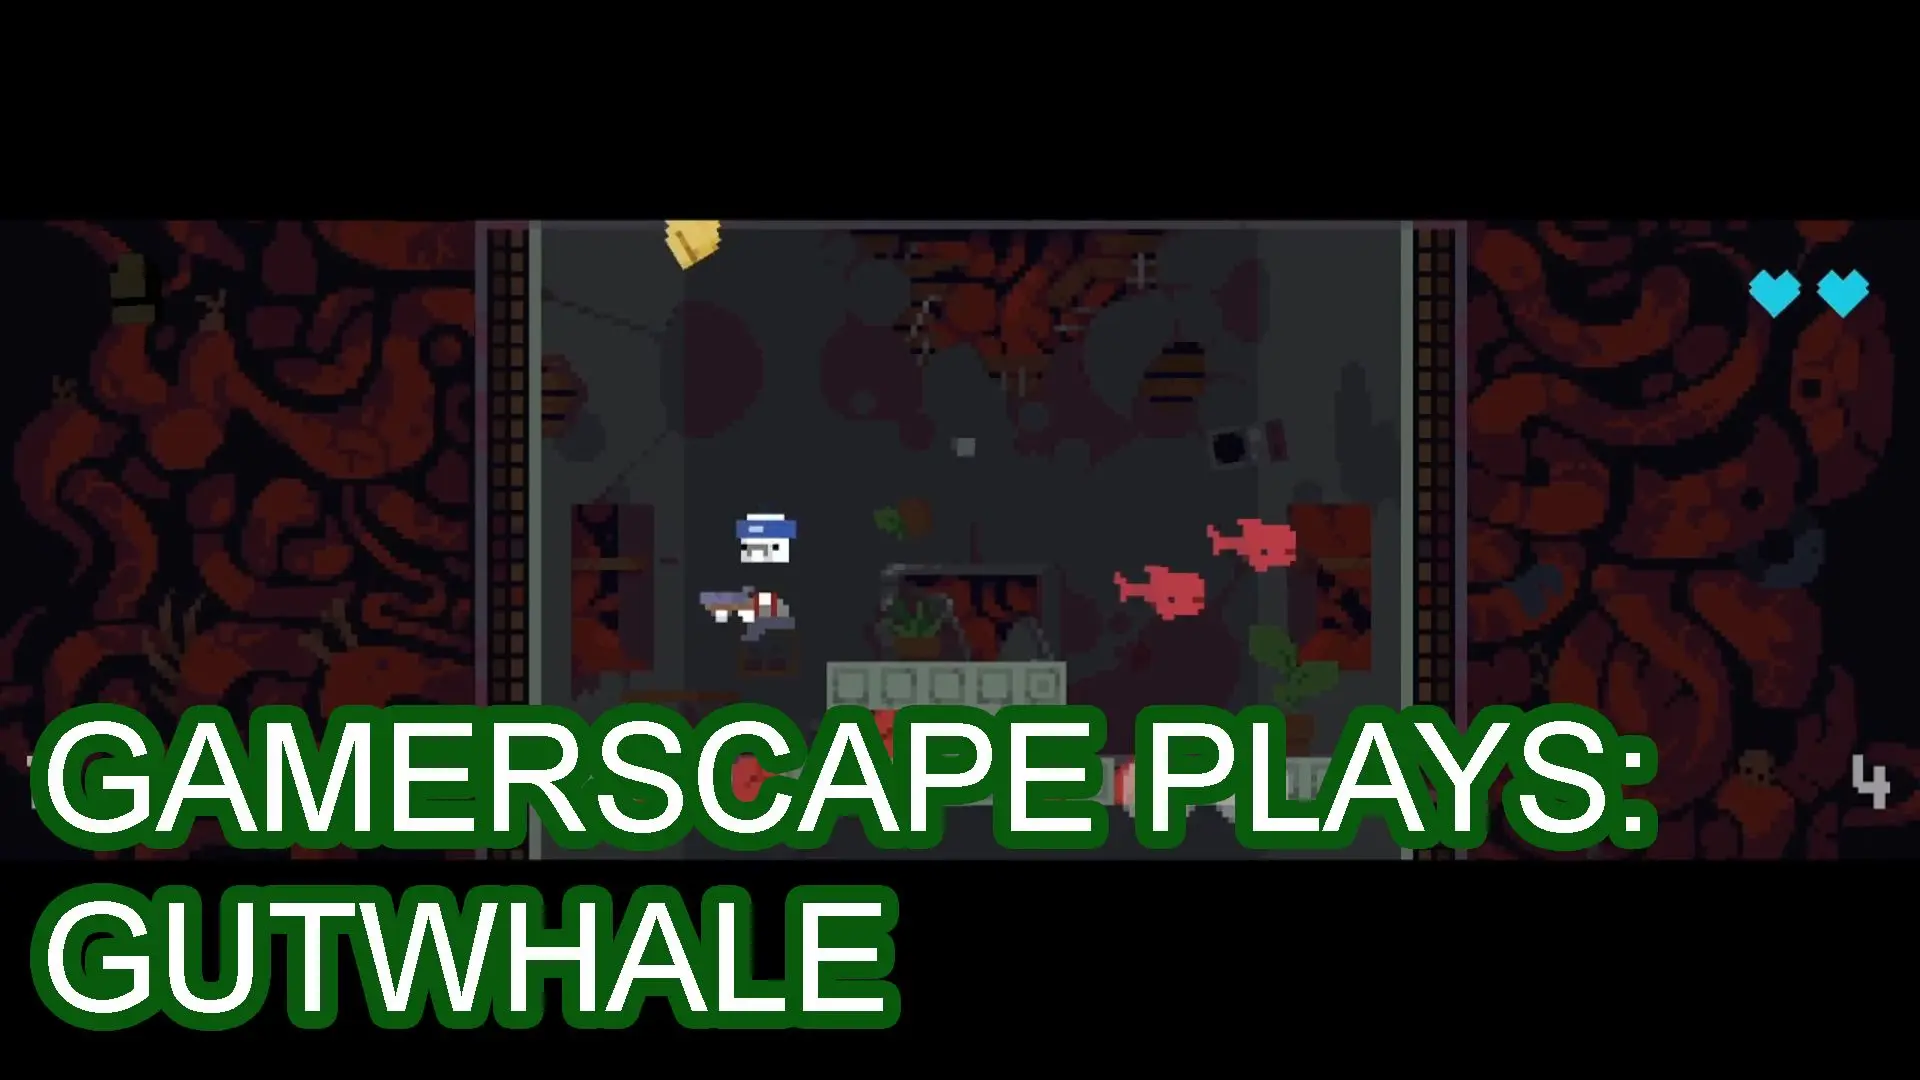 Gamerscape Plays: Gutwhale